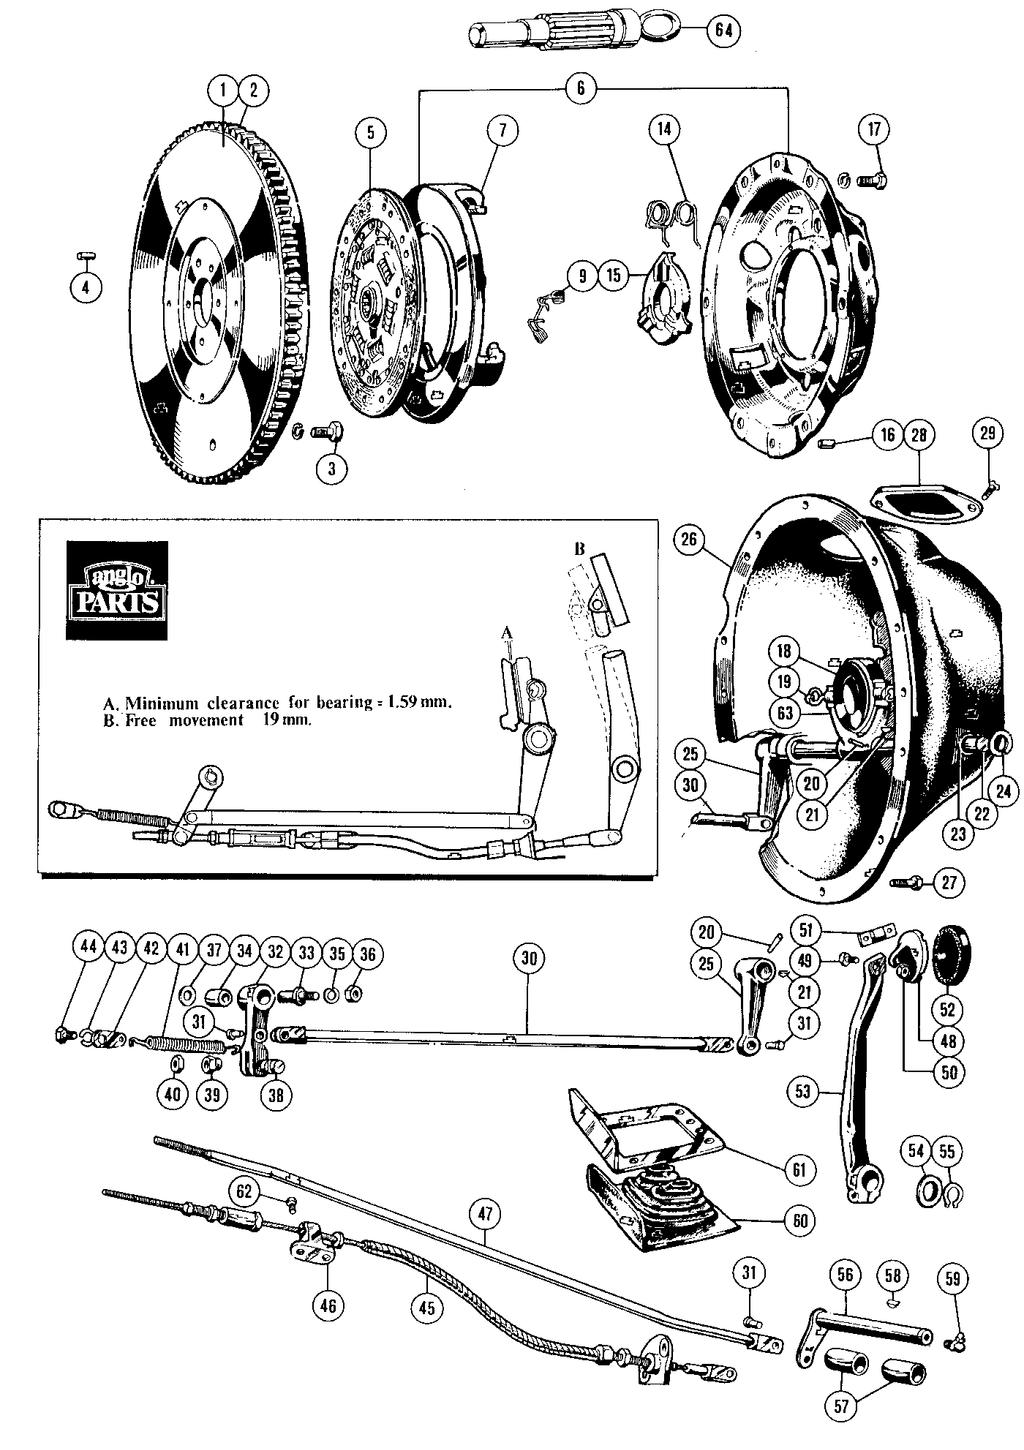 MGTD-TF 1949-1955 - Clutch covers | Webshop Anglo Parts - Clutch & components - 1